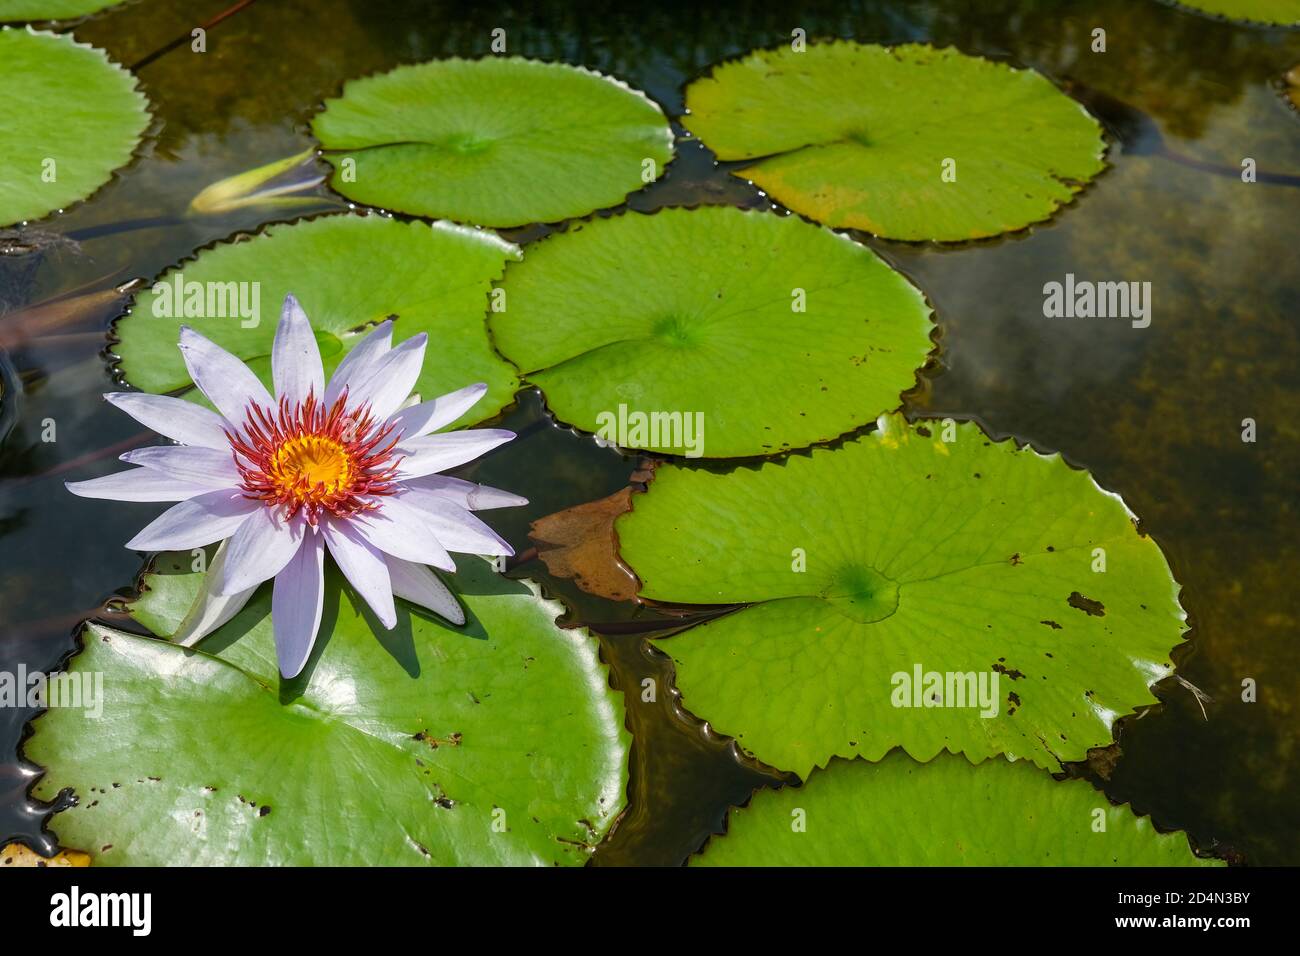 Nymphaea nouchali also known as Nymphaea stellata, dwarf water lily in full bloom Stock Photo